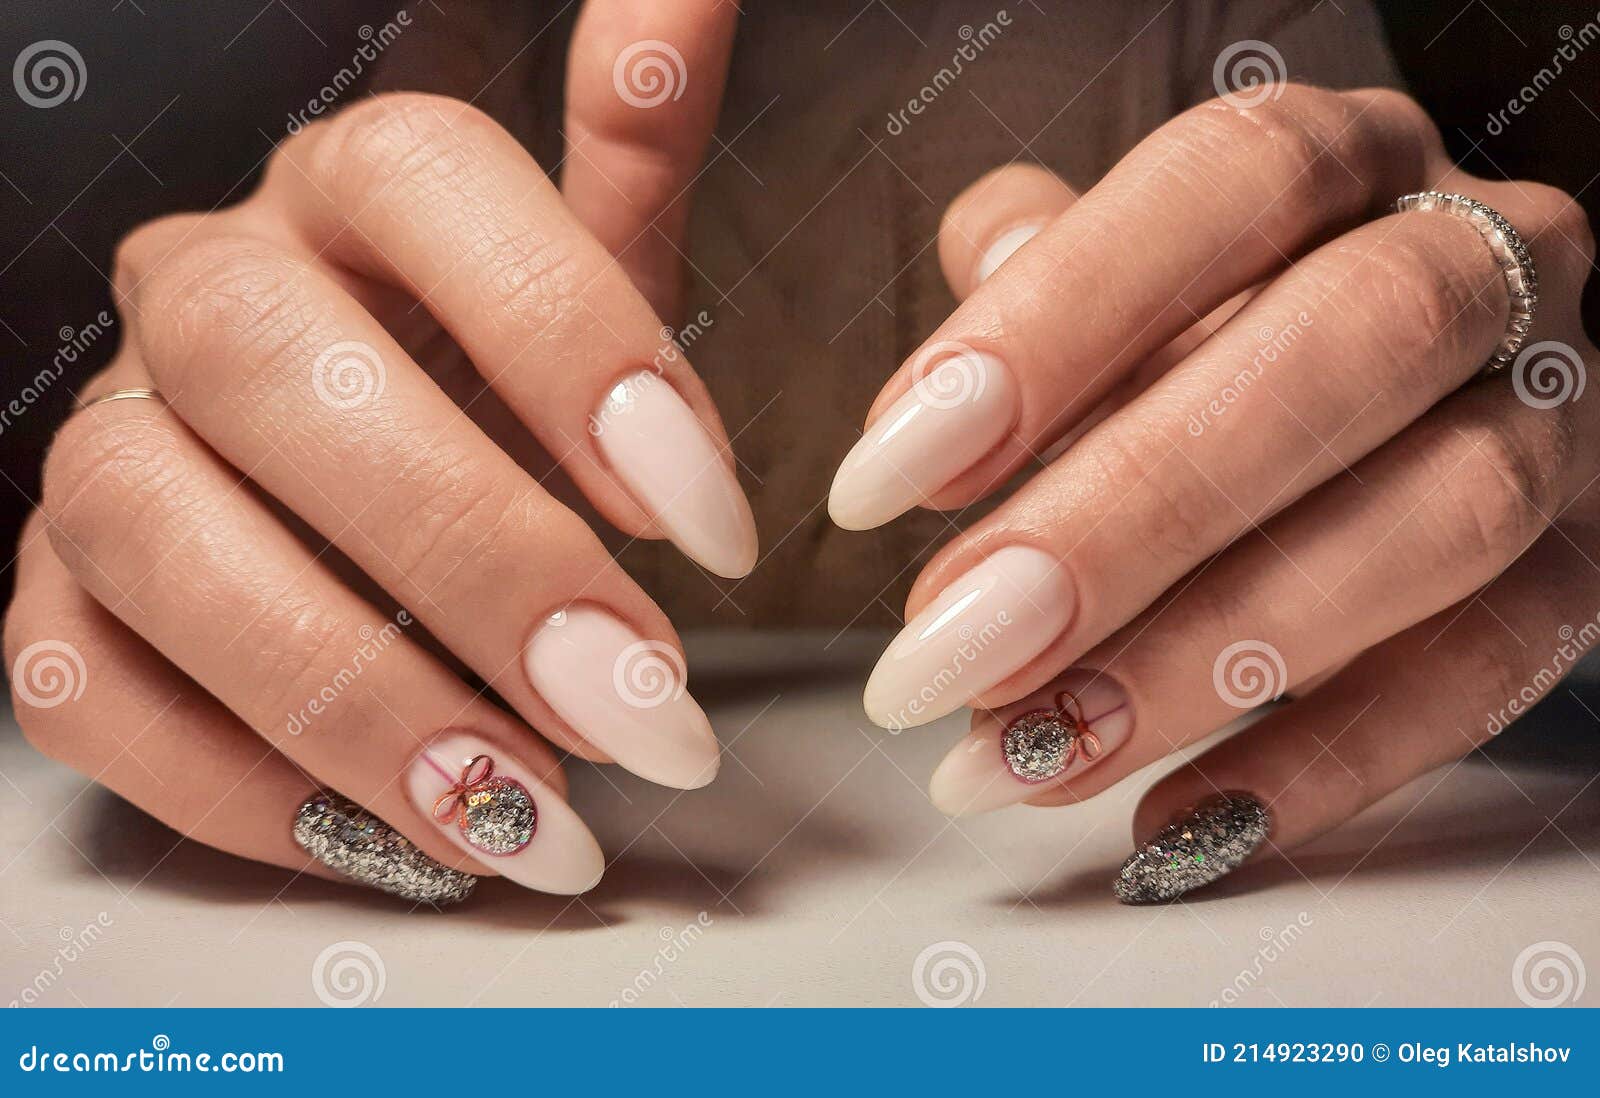 Delicate Pink Gel Polish On Long Nails With A Silver Design. Nude Manicure  With A Brilliant Design Stock Photo - Image Of Finger, Brilliant: 214923290